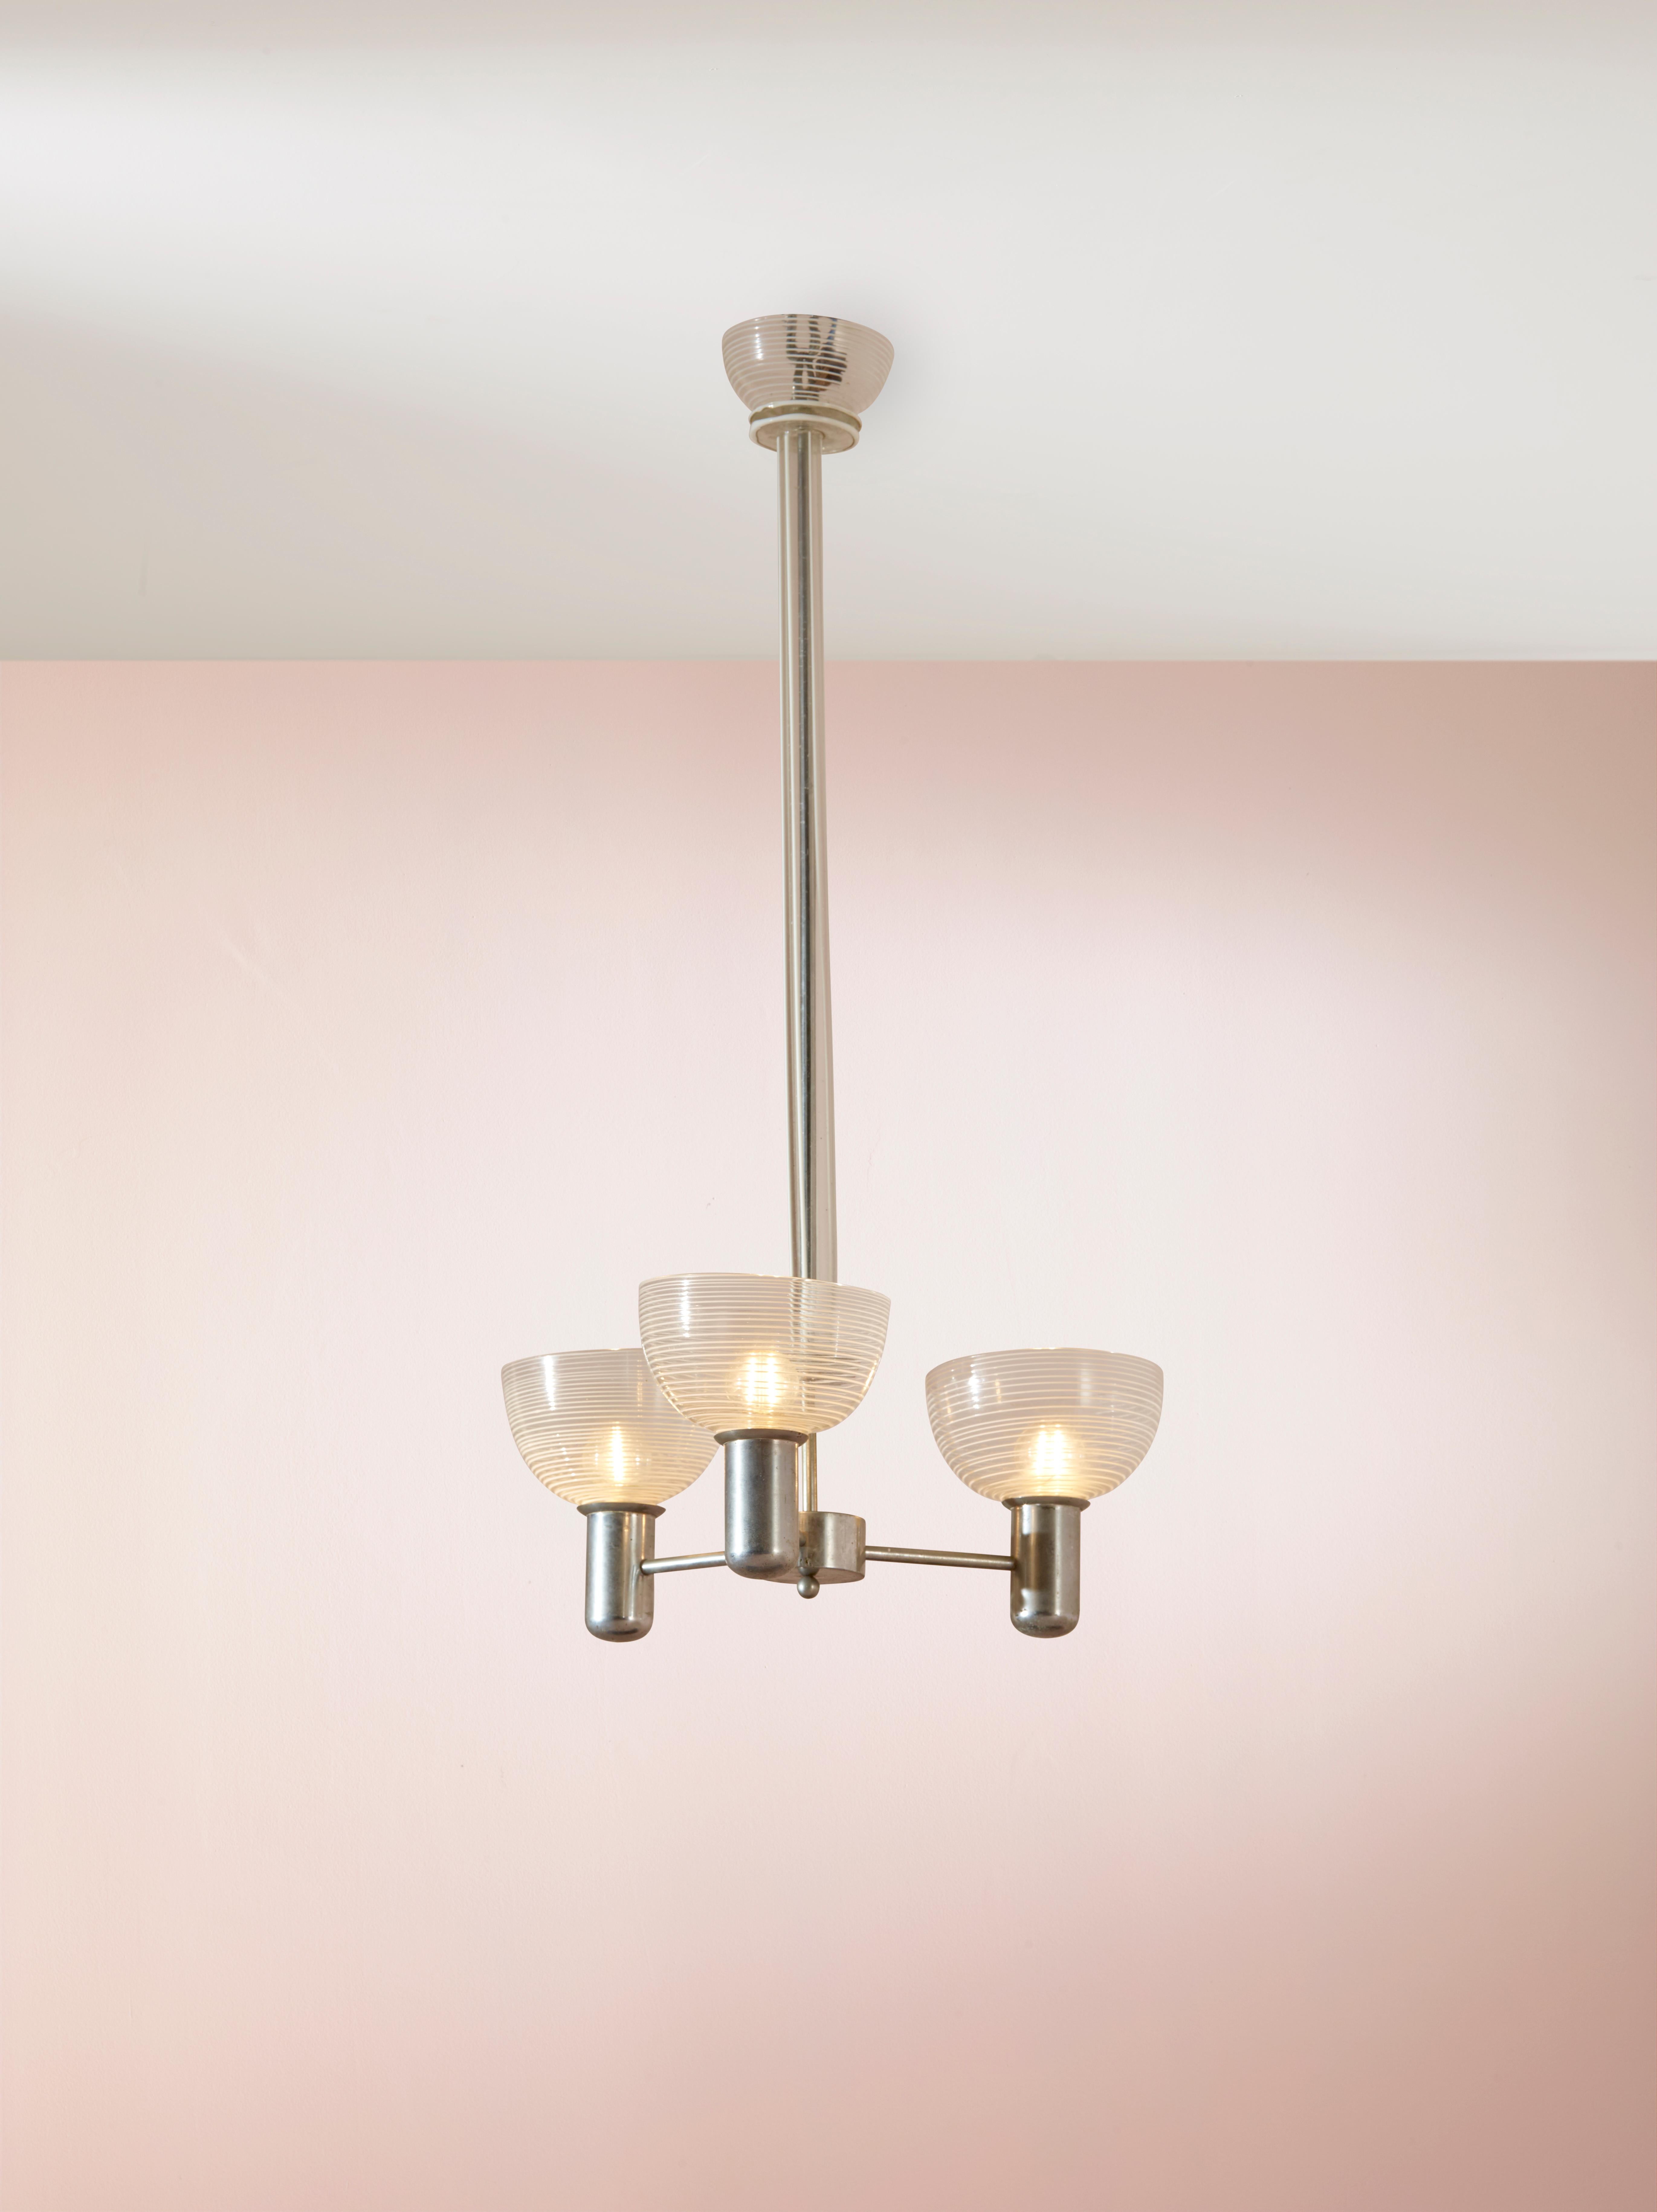 Metal Murano Rationalist Chandelier with Filigrana and Lattimo Glass, Italy, 1930s For Sale